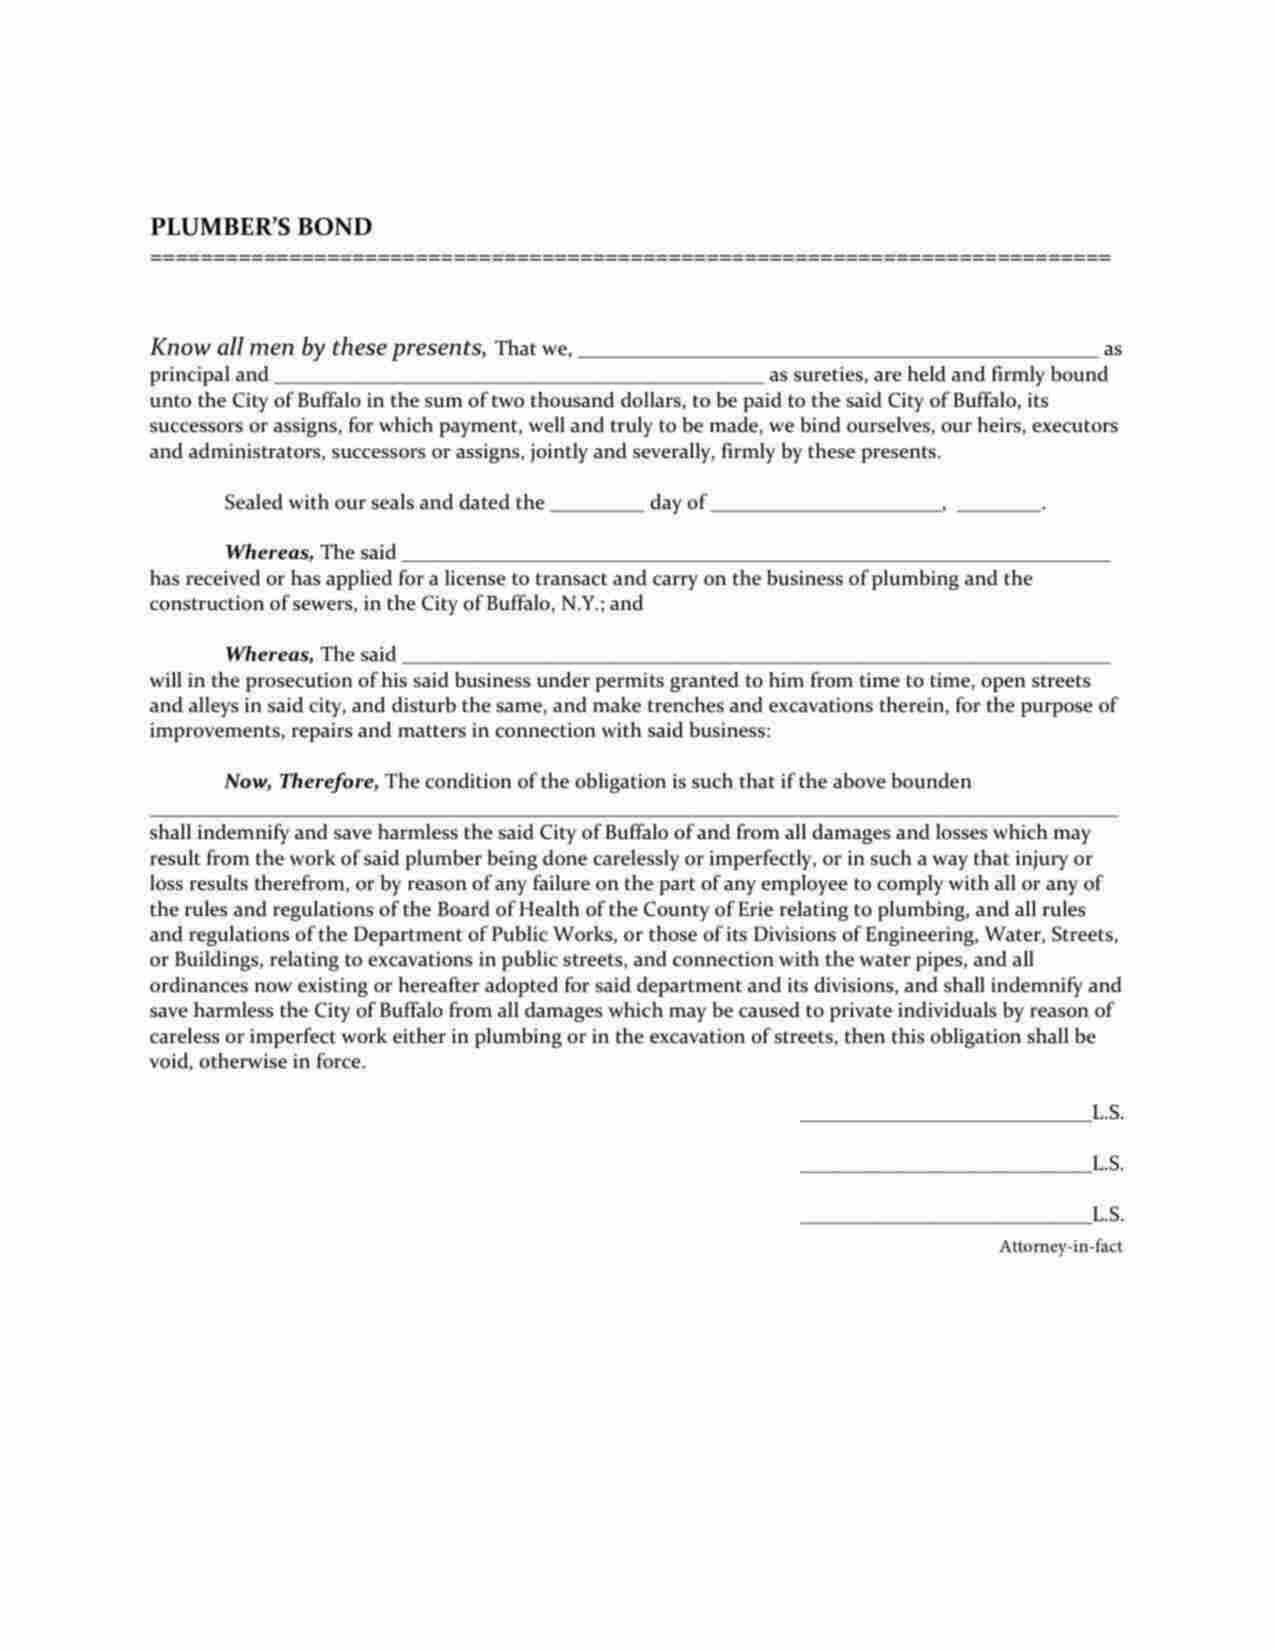 New York Plumber/Sewer Contractor Bond Form